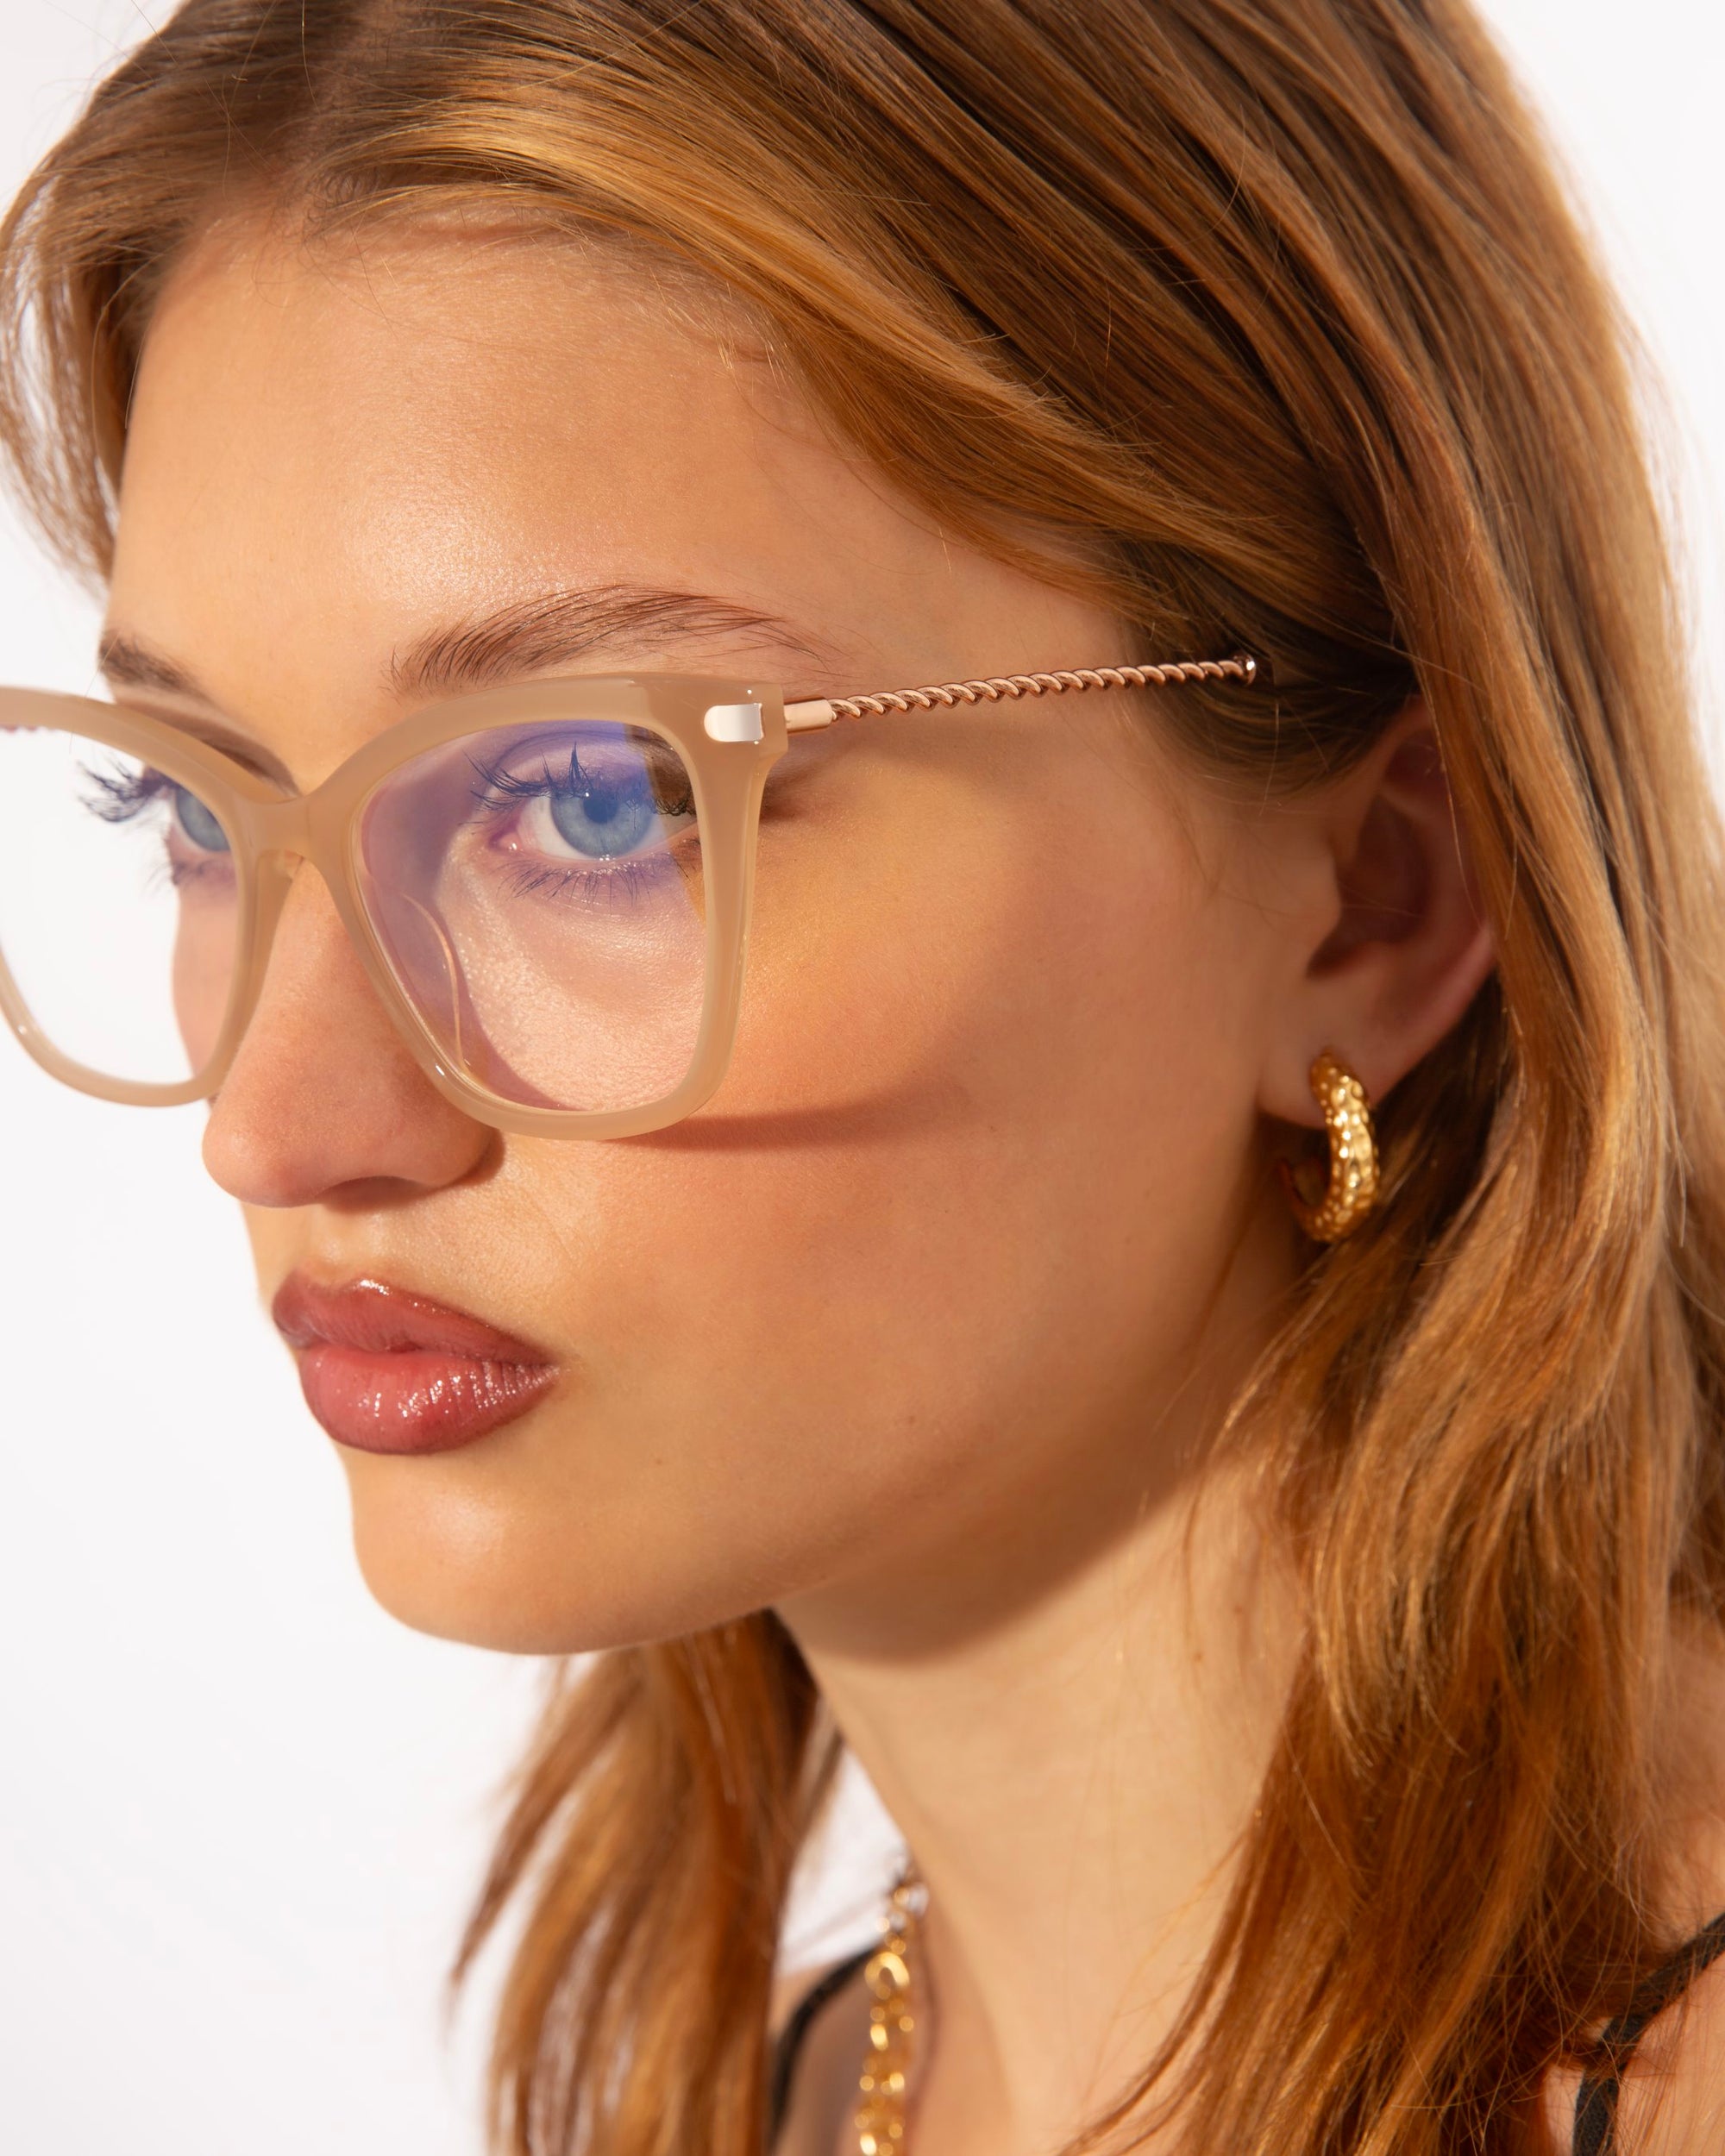 A close-up of a young person with long, light brown hair, wearing large, translucent beige acetate Cadenza glasses in a cat-eye silhouette from For Art&#39;s Sake®. They have a neutral expression and wear a small, twisted gold hoop earring. The background is white, highlighting their features and accessories.